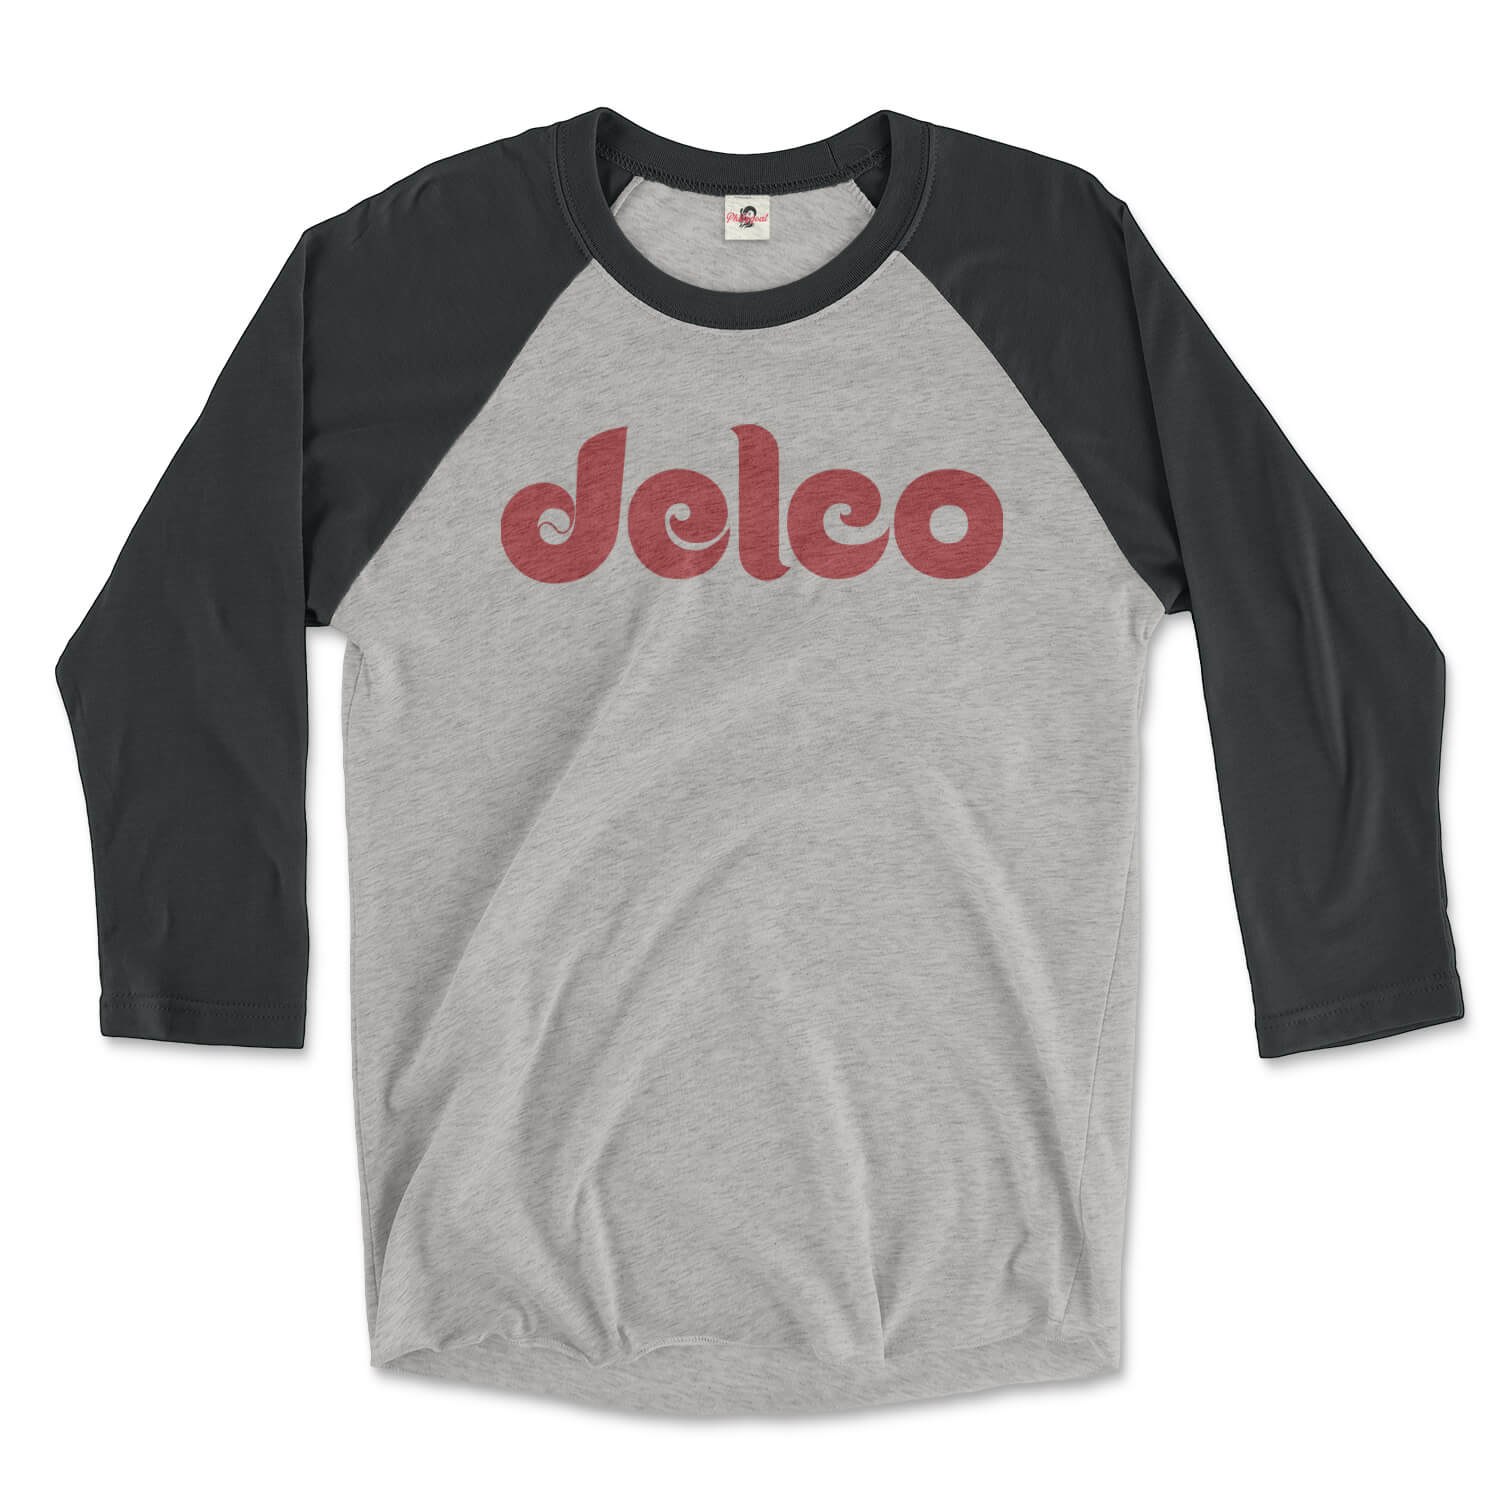 delco vintage black and premium heather grey 3/4 long sleeve raglan tee from phillygoat